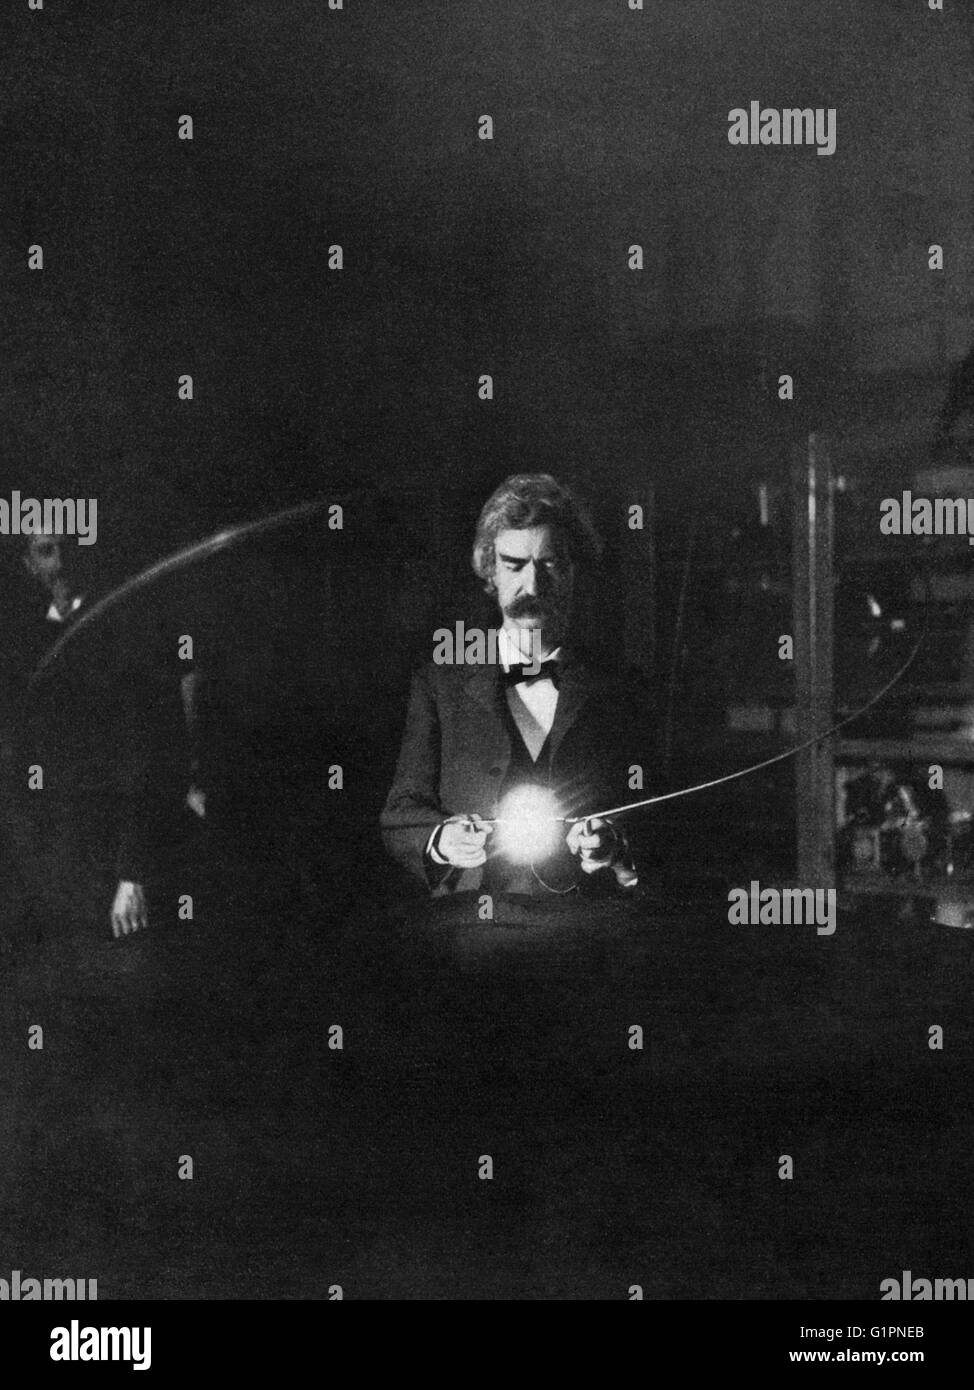 MARK TWAIN (1835-1910). Samuel Clemens. American writer and humorist. Photographed in Nikola Tesla's laboratory; experiment illustrating the lighting of incandescent lamp by passing the current through the body. Photograph, January 1894. Stock Photo